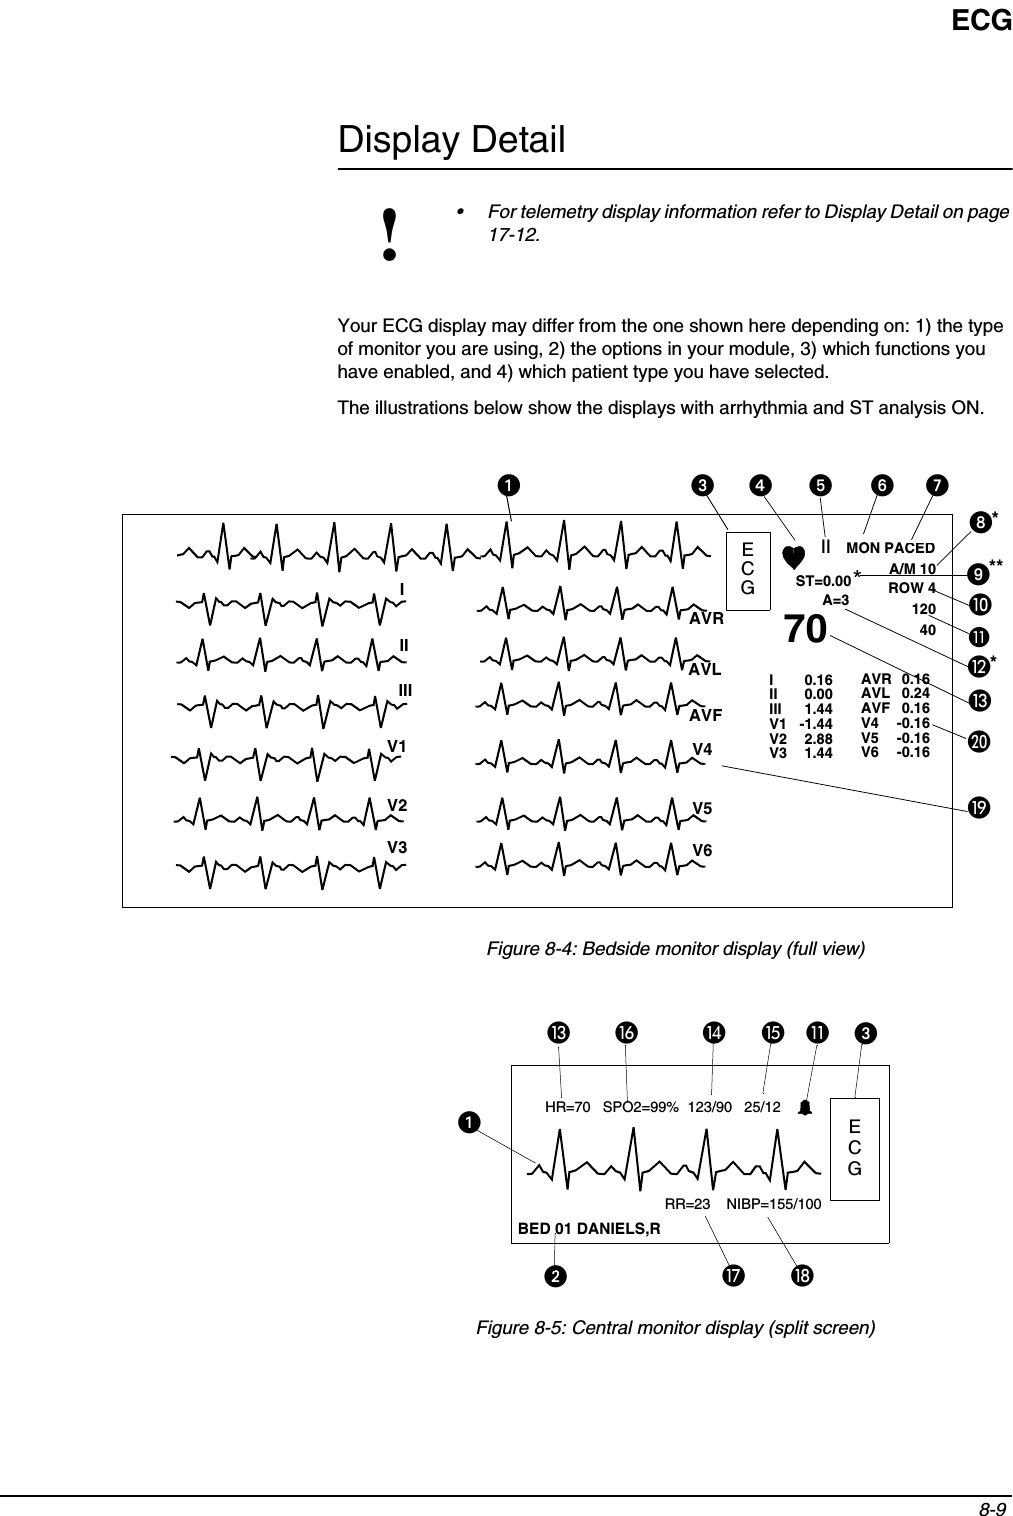 ECG8-9 Display DetailYour ECG display may differ from the one shown here depending on: 1) the type of monitor you are using, 2) the options in your module, 3) which functions you have enabled, and 4) which patient type you have selected.The illustrations below show the displays with arrhythmia and ST analysis ON.Figure 8-4: Bedside monitor display (full view)Figure 8-5: Central monitor display (split screen)!• For telemetry display information refer to Display Detail on page 17-12.**ECGIIA=3A/M 10ROW 41204070AVRAVLAVFV4V5V6V1V2V3IIIIIIIIIIIIV1V2V3AVRAVL  AVFV4V5V60.160.001.44 -1.442.881.440.160.16-0.16-0.16-0.160.24ST=0.00***MON PACED쐅쐉쐈씏씎씈ECGHR=70   SPO2=99%  123/90   25/12BED 01 DANIELS,RRR=23    NIBP=155/100씌씍쐈씊씉씋씈